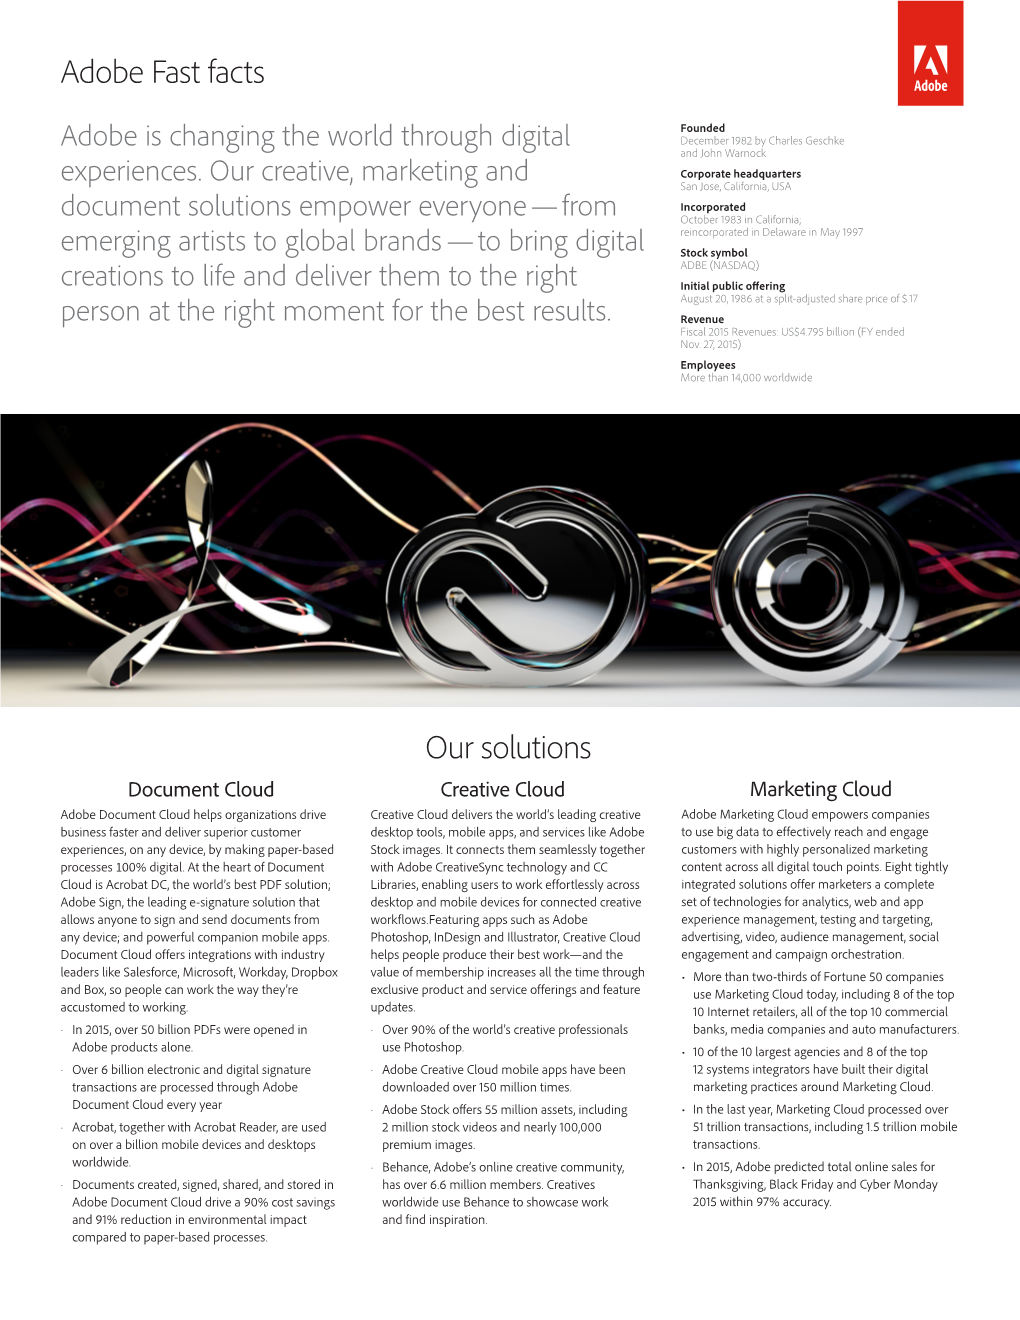 Adobe Fast Facts